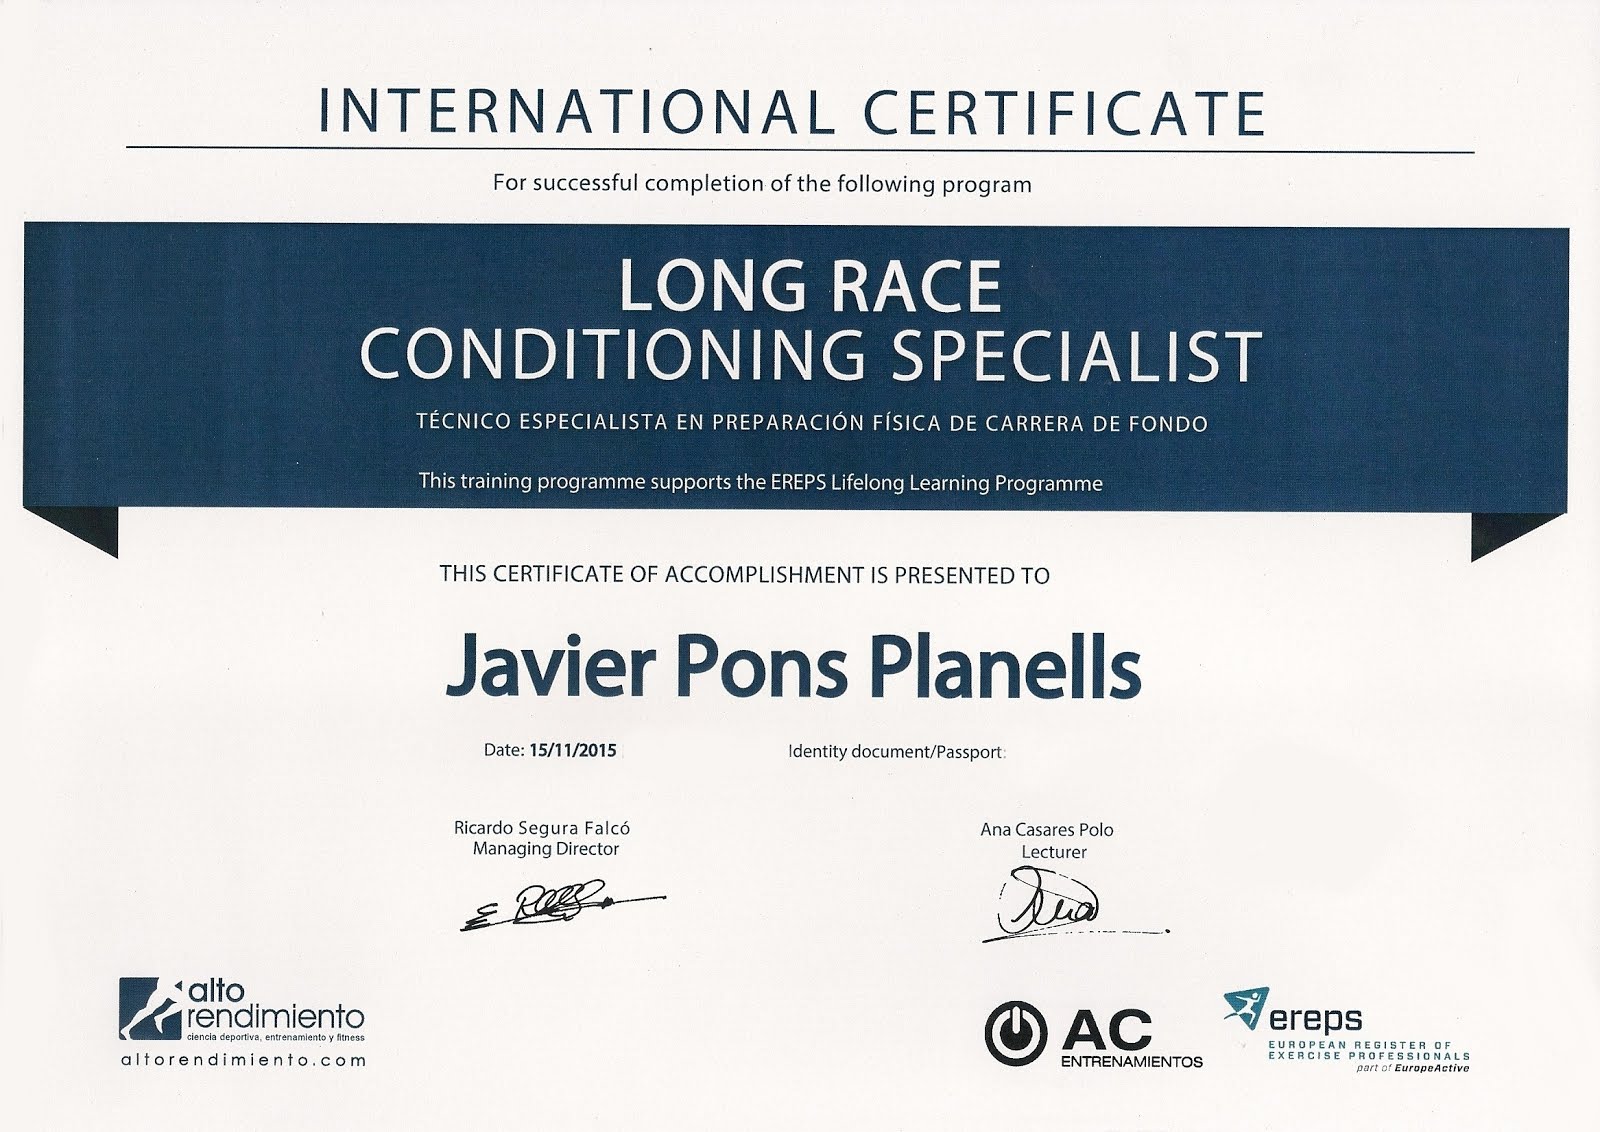 INTERNATIONAL CERTIFICATE LONG RACE CONDITIONING SPECIALIST